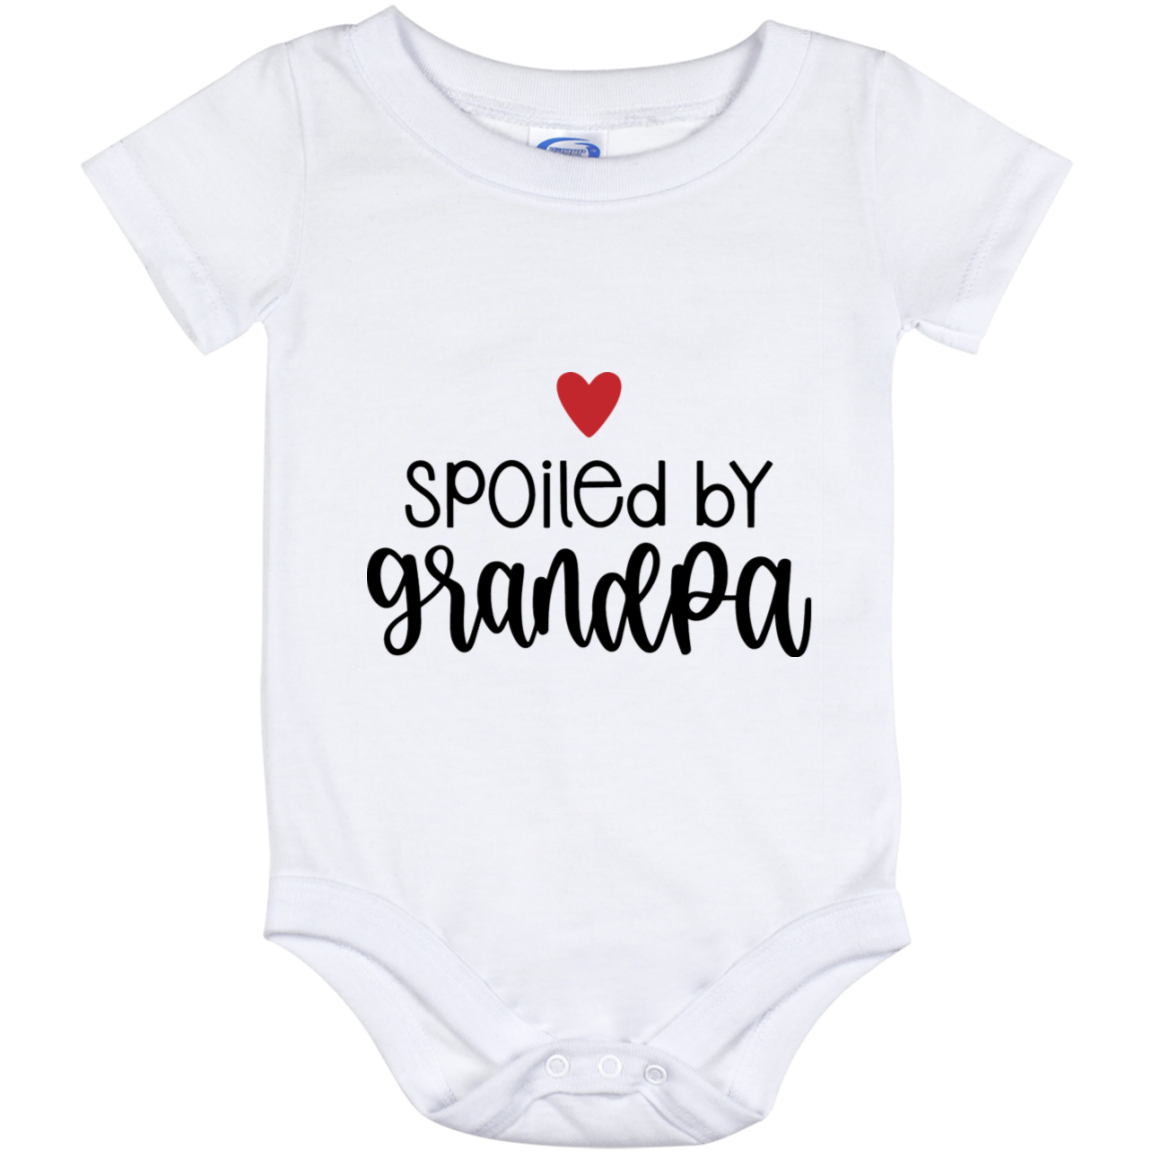 Spoiled by Grandpa Baby Onesie 12 Month